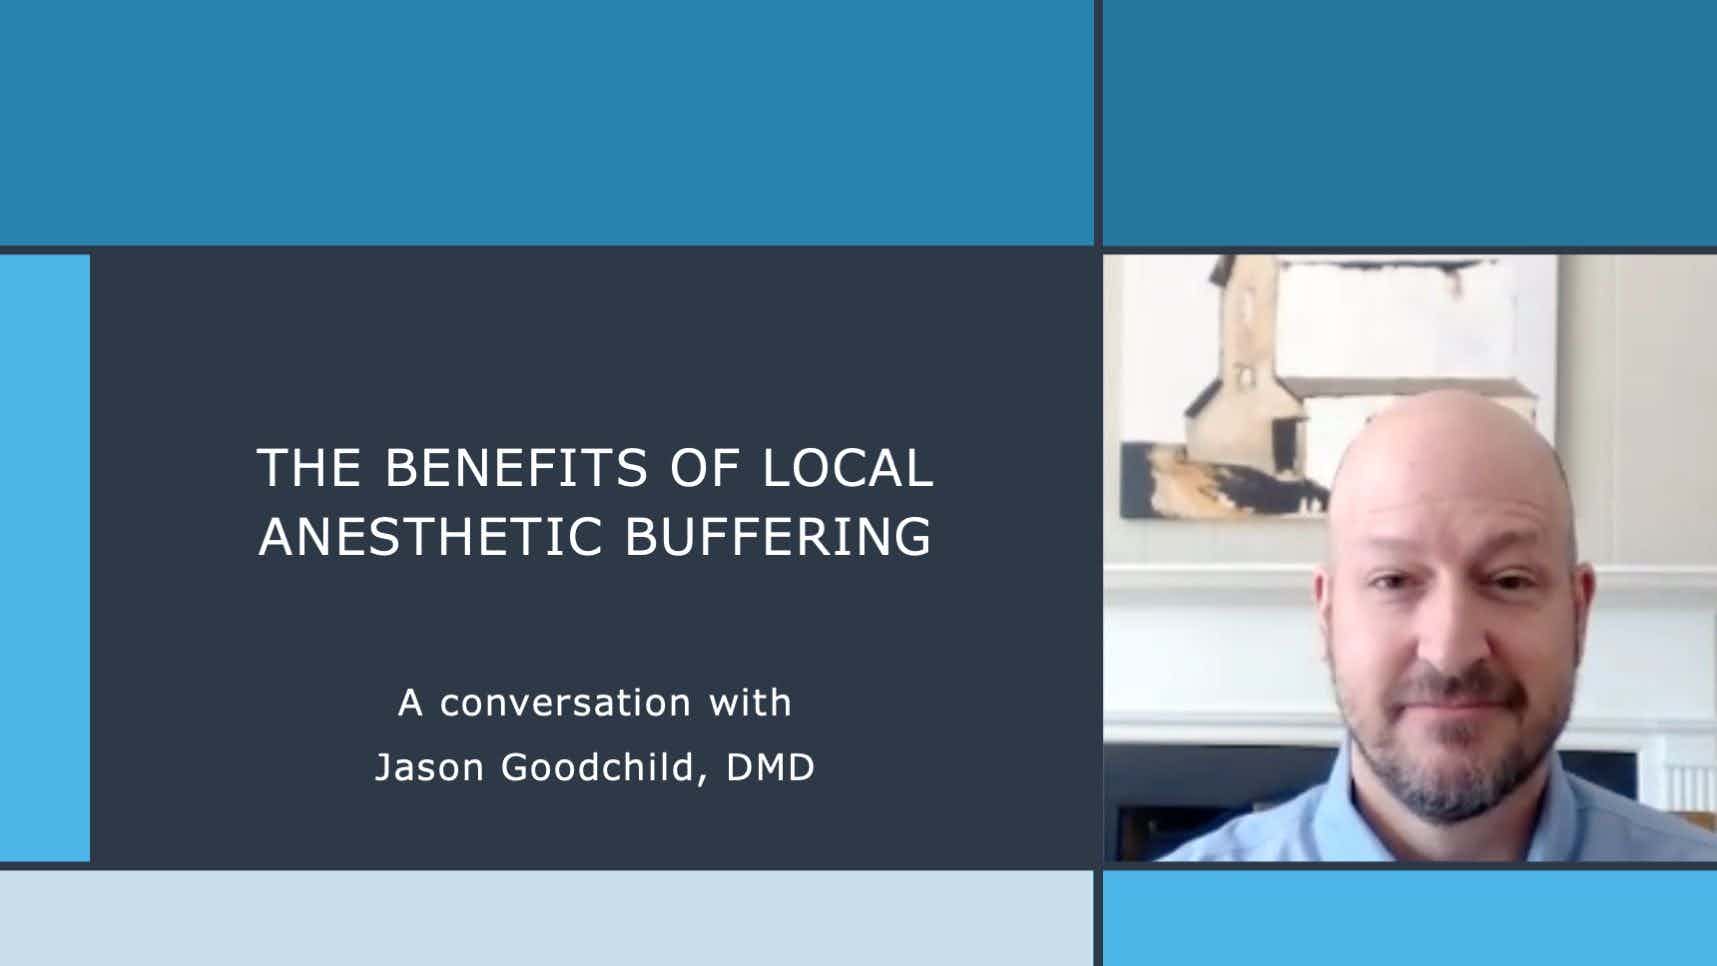  The Benefits of Local Anesthetic Buffering: A conversation with Jason Goodchild, DMD